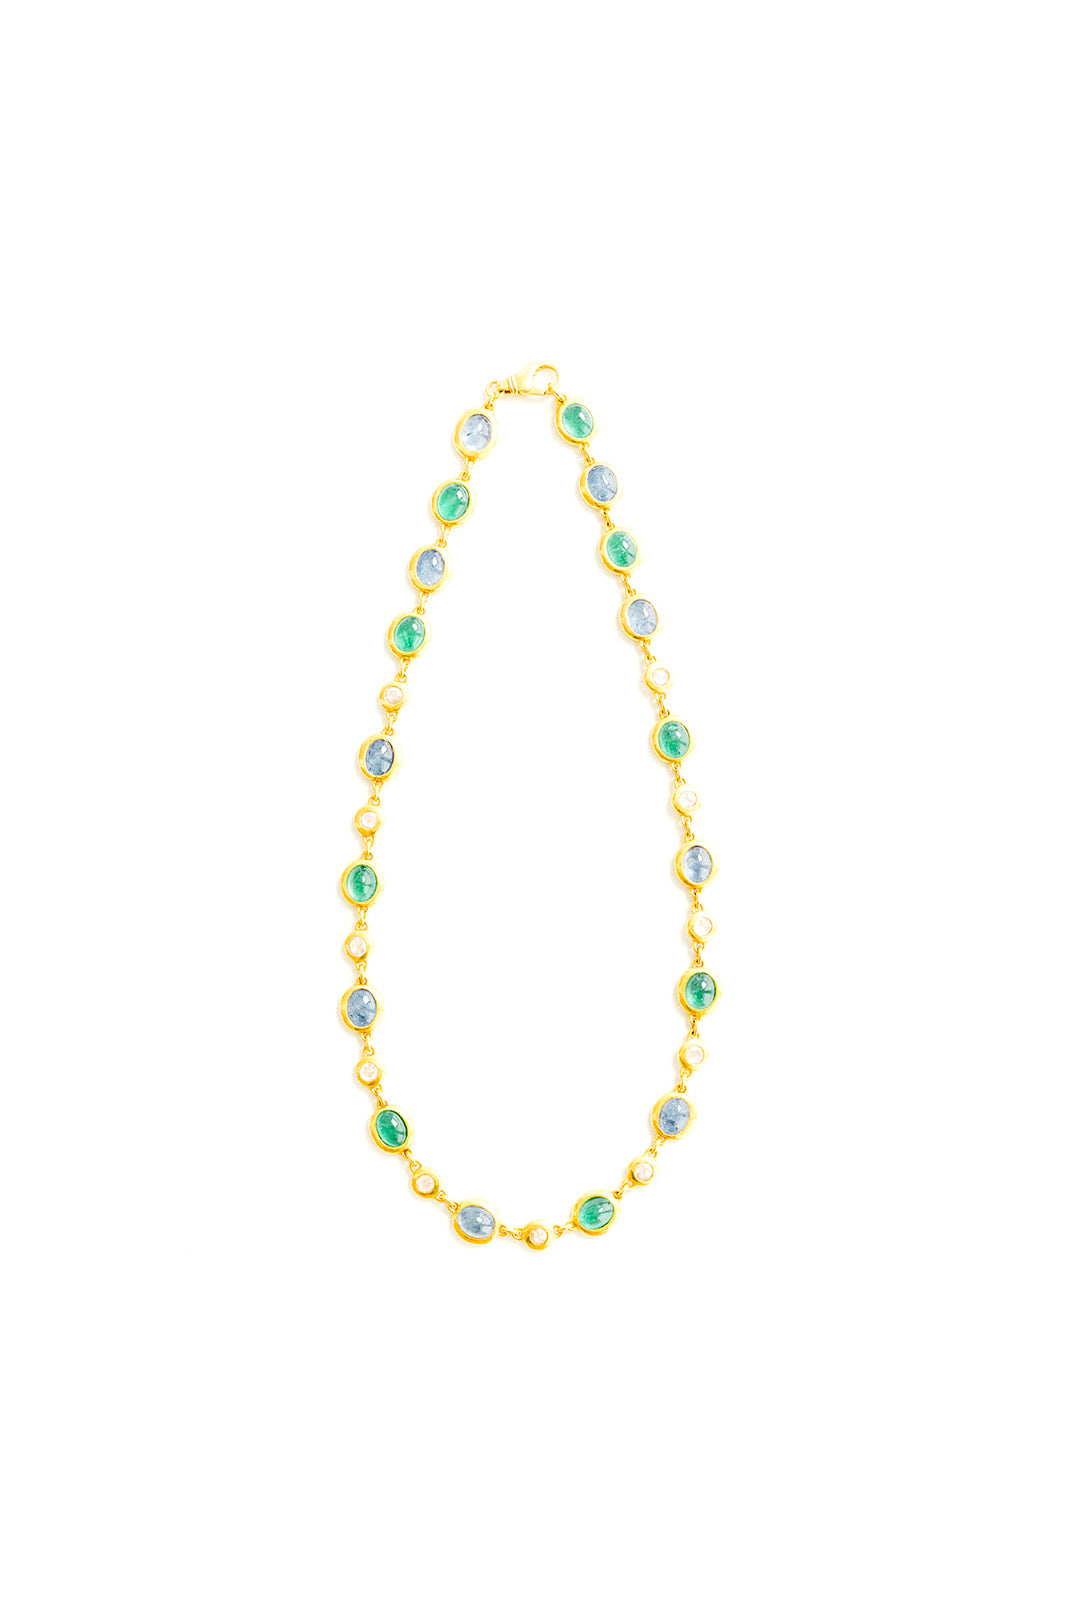 22K Yellow Gold Linked Necklace with Emeralds, Ceylon Sapphire, and Diamonds